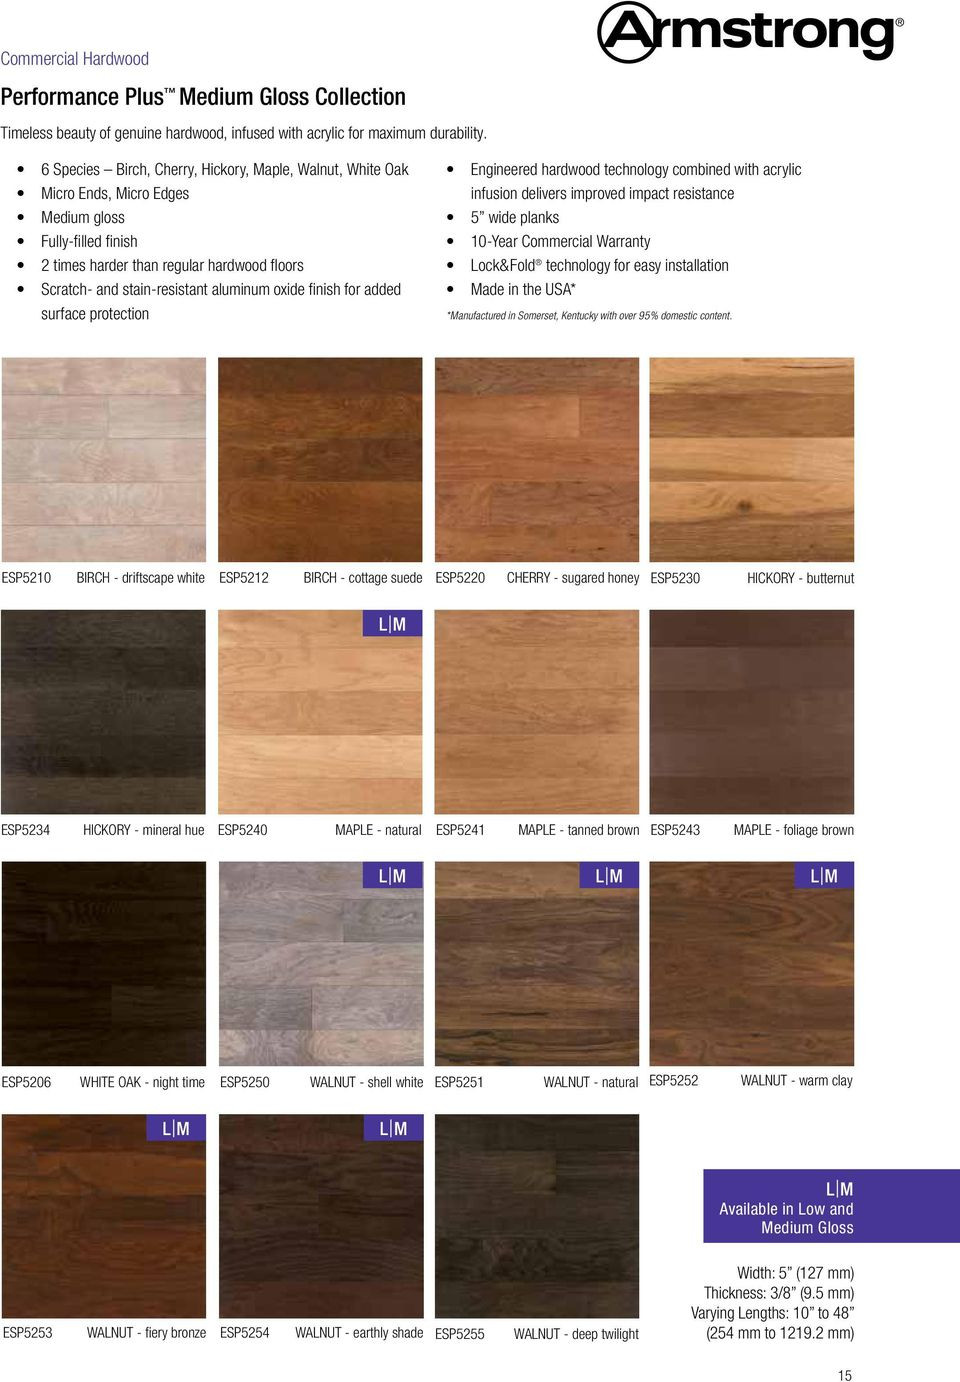 22 Fantastic Maple Amber Hardwood Flooring 2024 free download maple amber hardwood flooring of performance plus midtown pdf regarding oxide finish for added surface protection engineered hardwood technology combined with acrylic infusion delivers impro